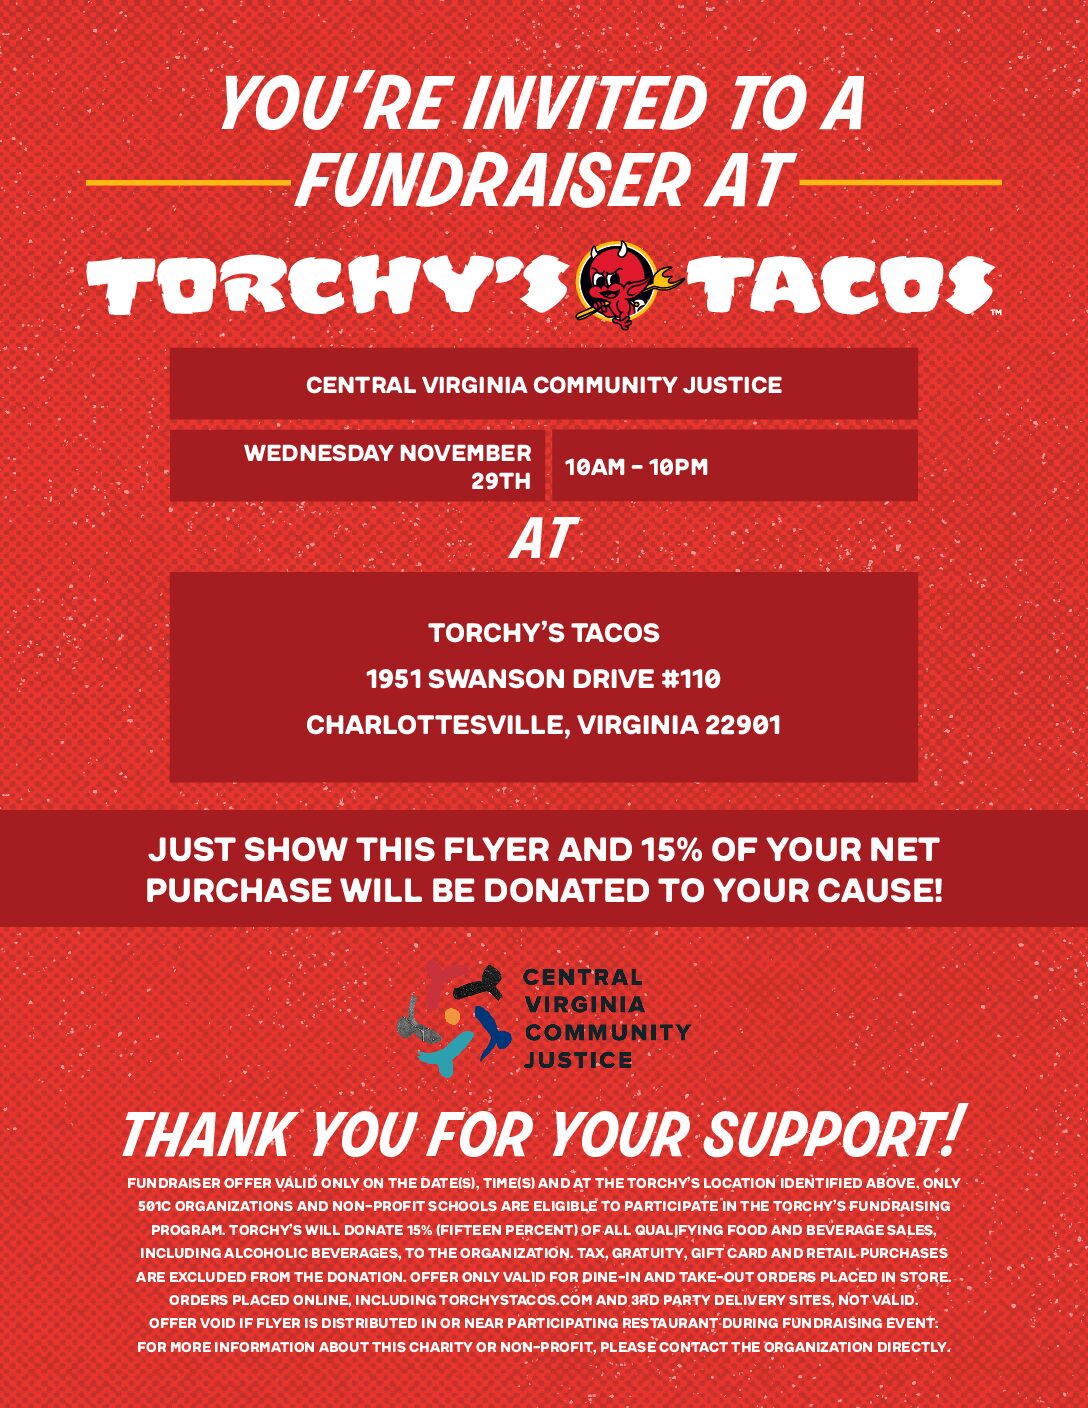 Support CVCJ by eating tacos!